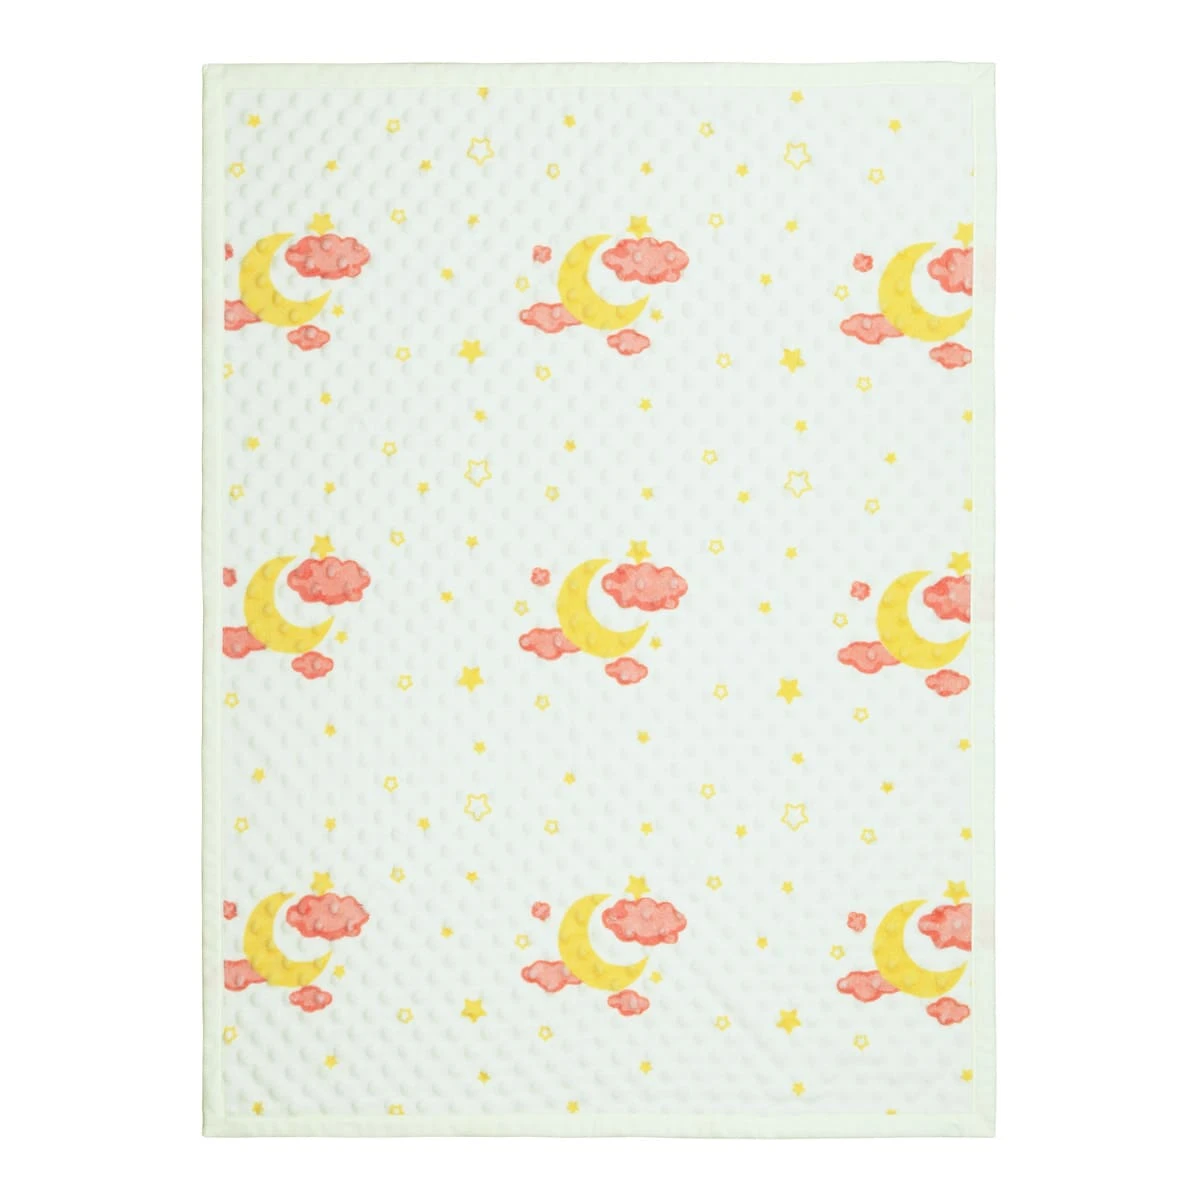 Moon Star and Cloud Printed Dimple Touch Velfleece Reversible Fleece Baby Blanket (Old Rose)